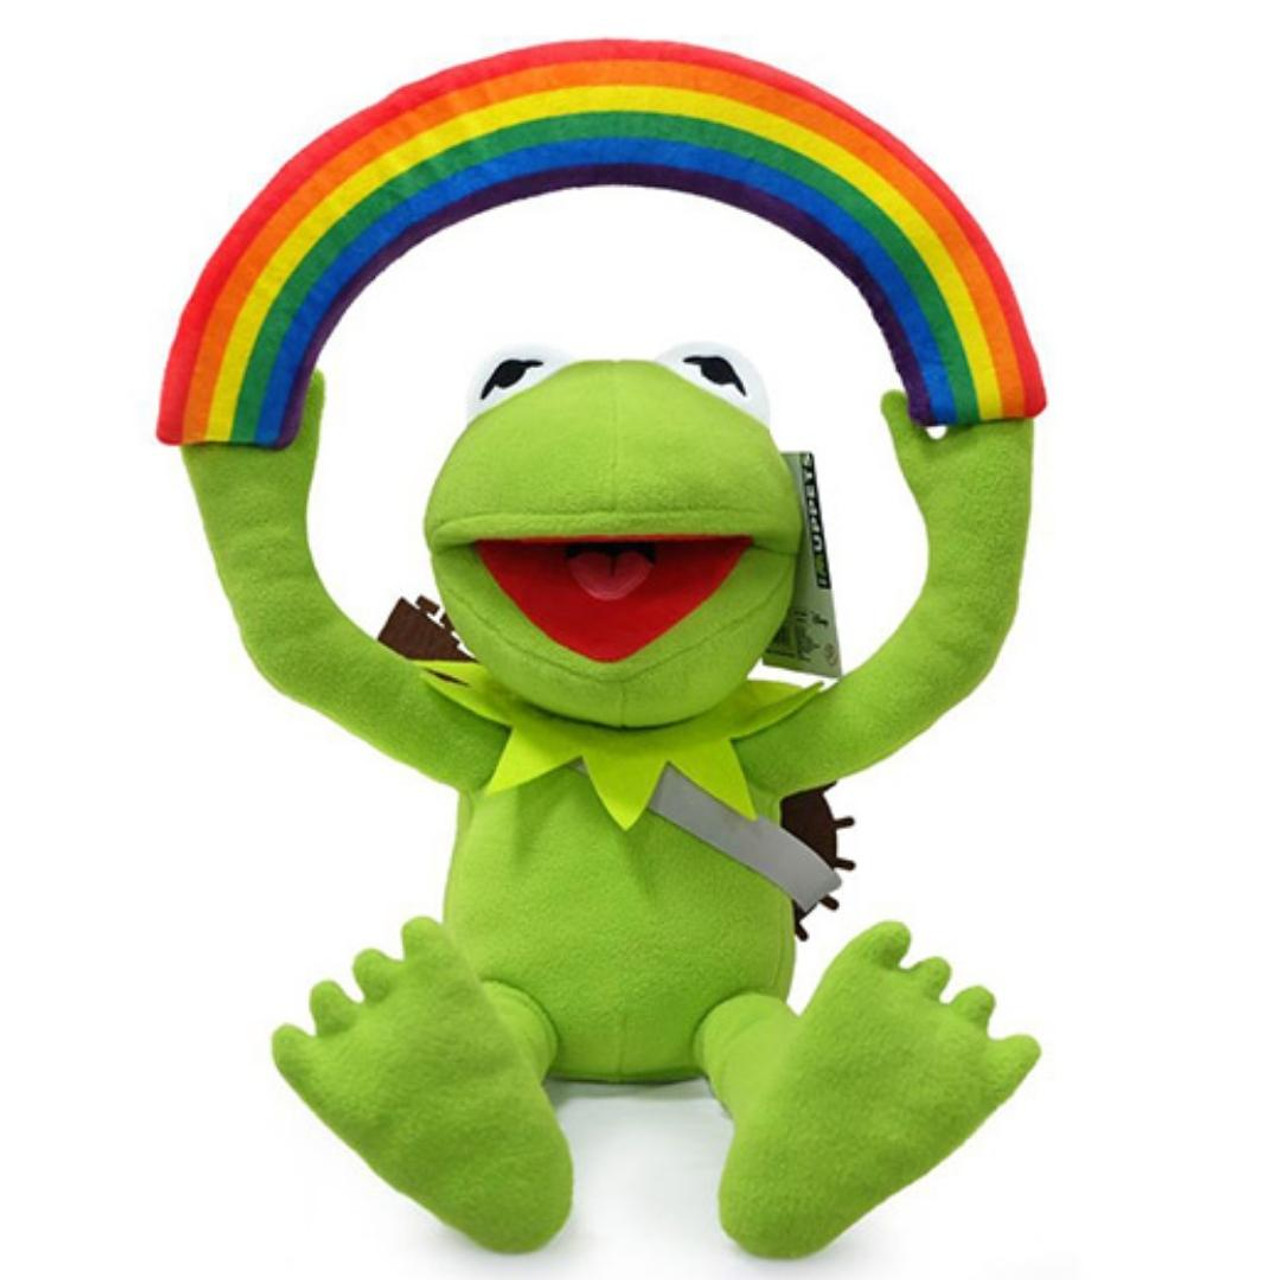 The Muppets Rainbow Connection Kermit 13 Phunny Plush Toy by Kidrobot 